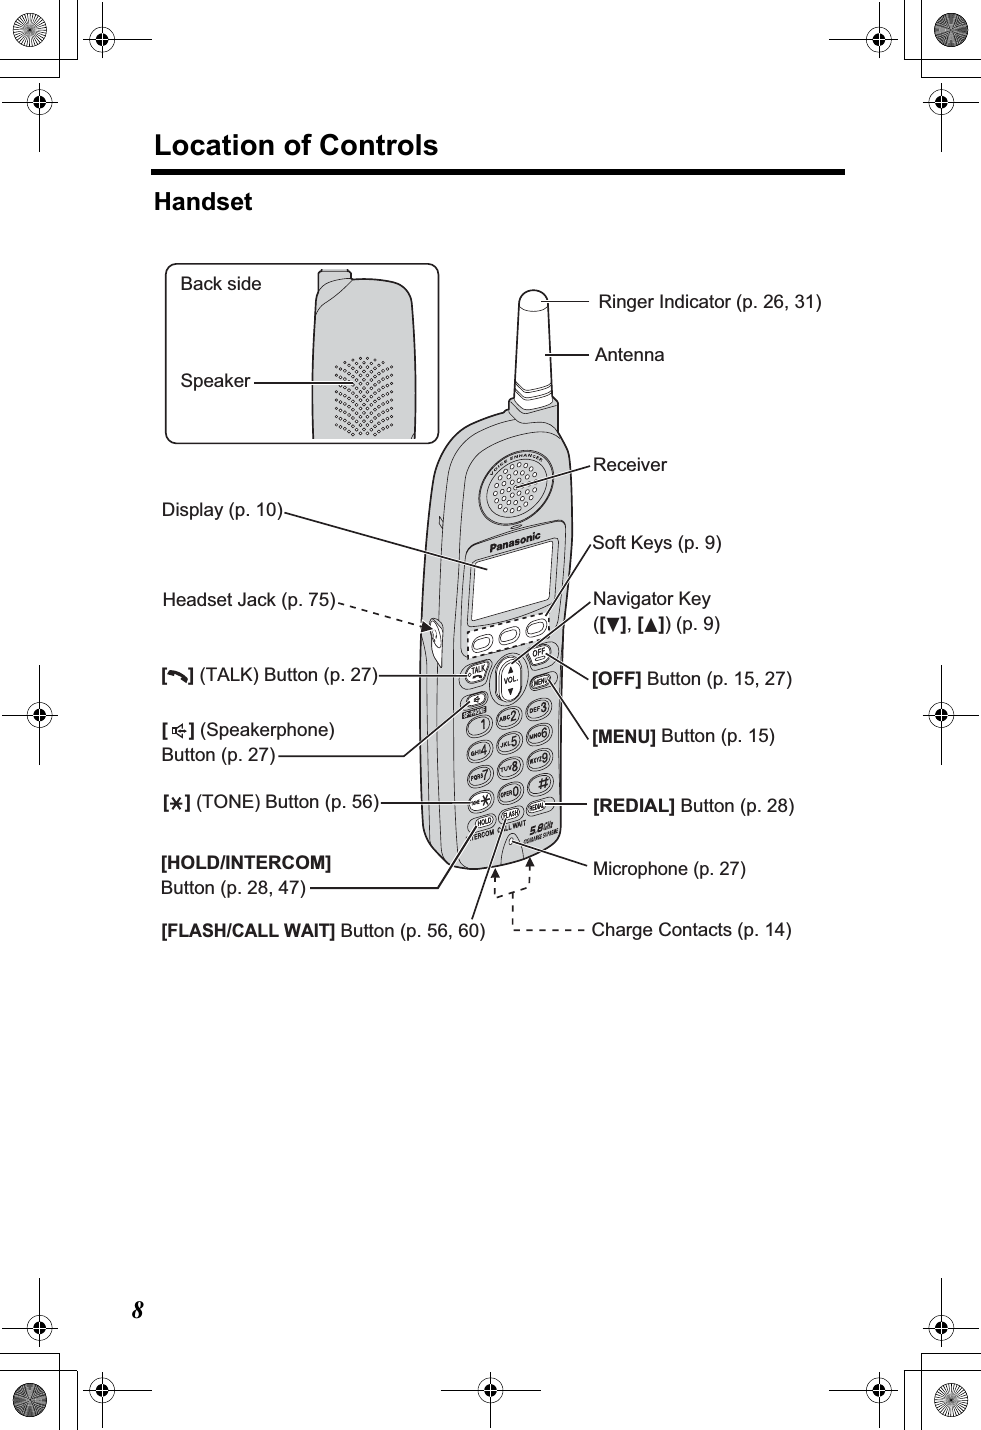 Location of Controls8HandsetBack sideSpeakerHeadset Jack (p. 75)[] (TALK) Button (p. 27)[    ] (Speakerphone) Button (p. 27)[MENU]Button (p. 15)Microphone (p. 27)Charge Contacts (p. 14)AntennaDisplay (p. 10)[OFF] Button (p. 15, 27) [HOLD/INTERCOM]Button (p. 28, 47)[REDIAL] Button (p. 28)Soft Keys (p. 9)Receiver[FLASH/CALL WAIT]Button (p. 56, 60)Navigator Key([d],[B]) (p. 9)Ringer Indicator (p. 26, 31)[](TONE) Button (p. 56)